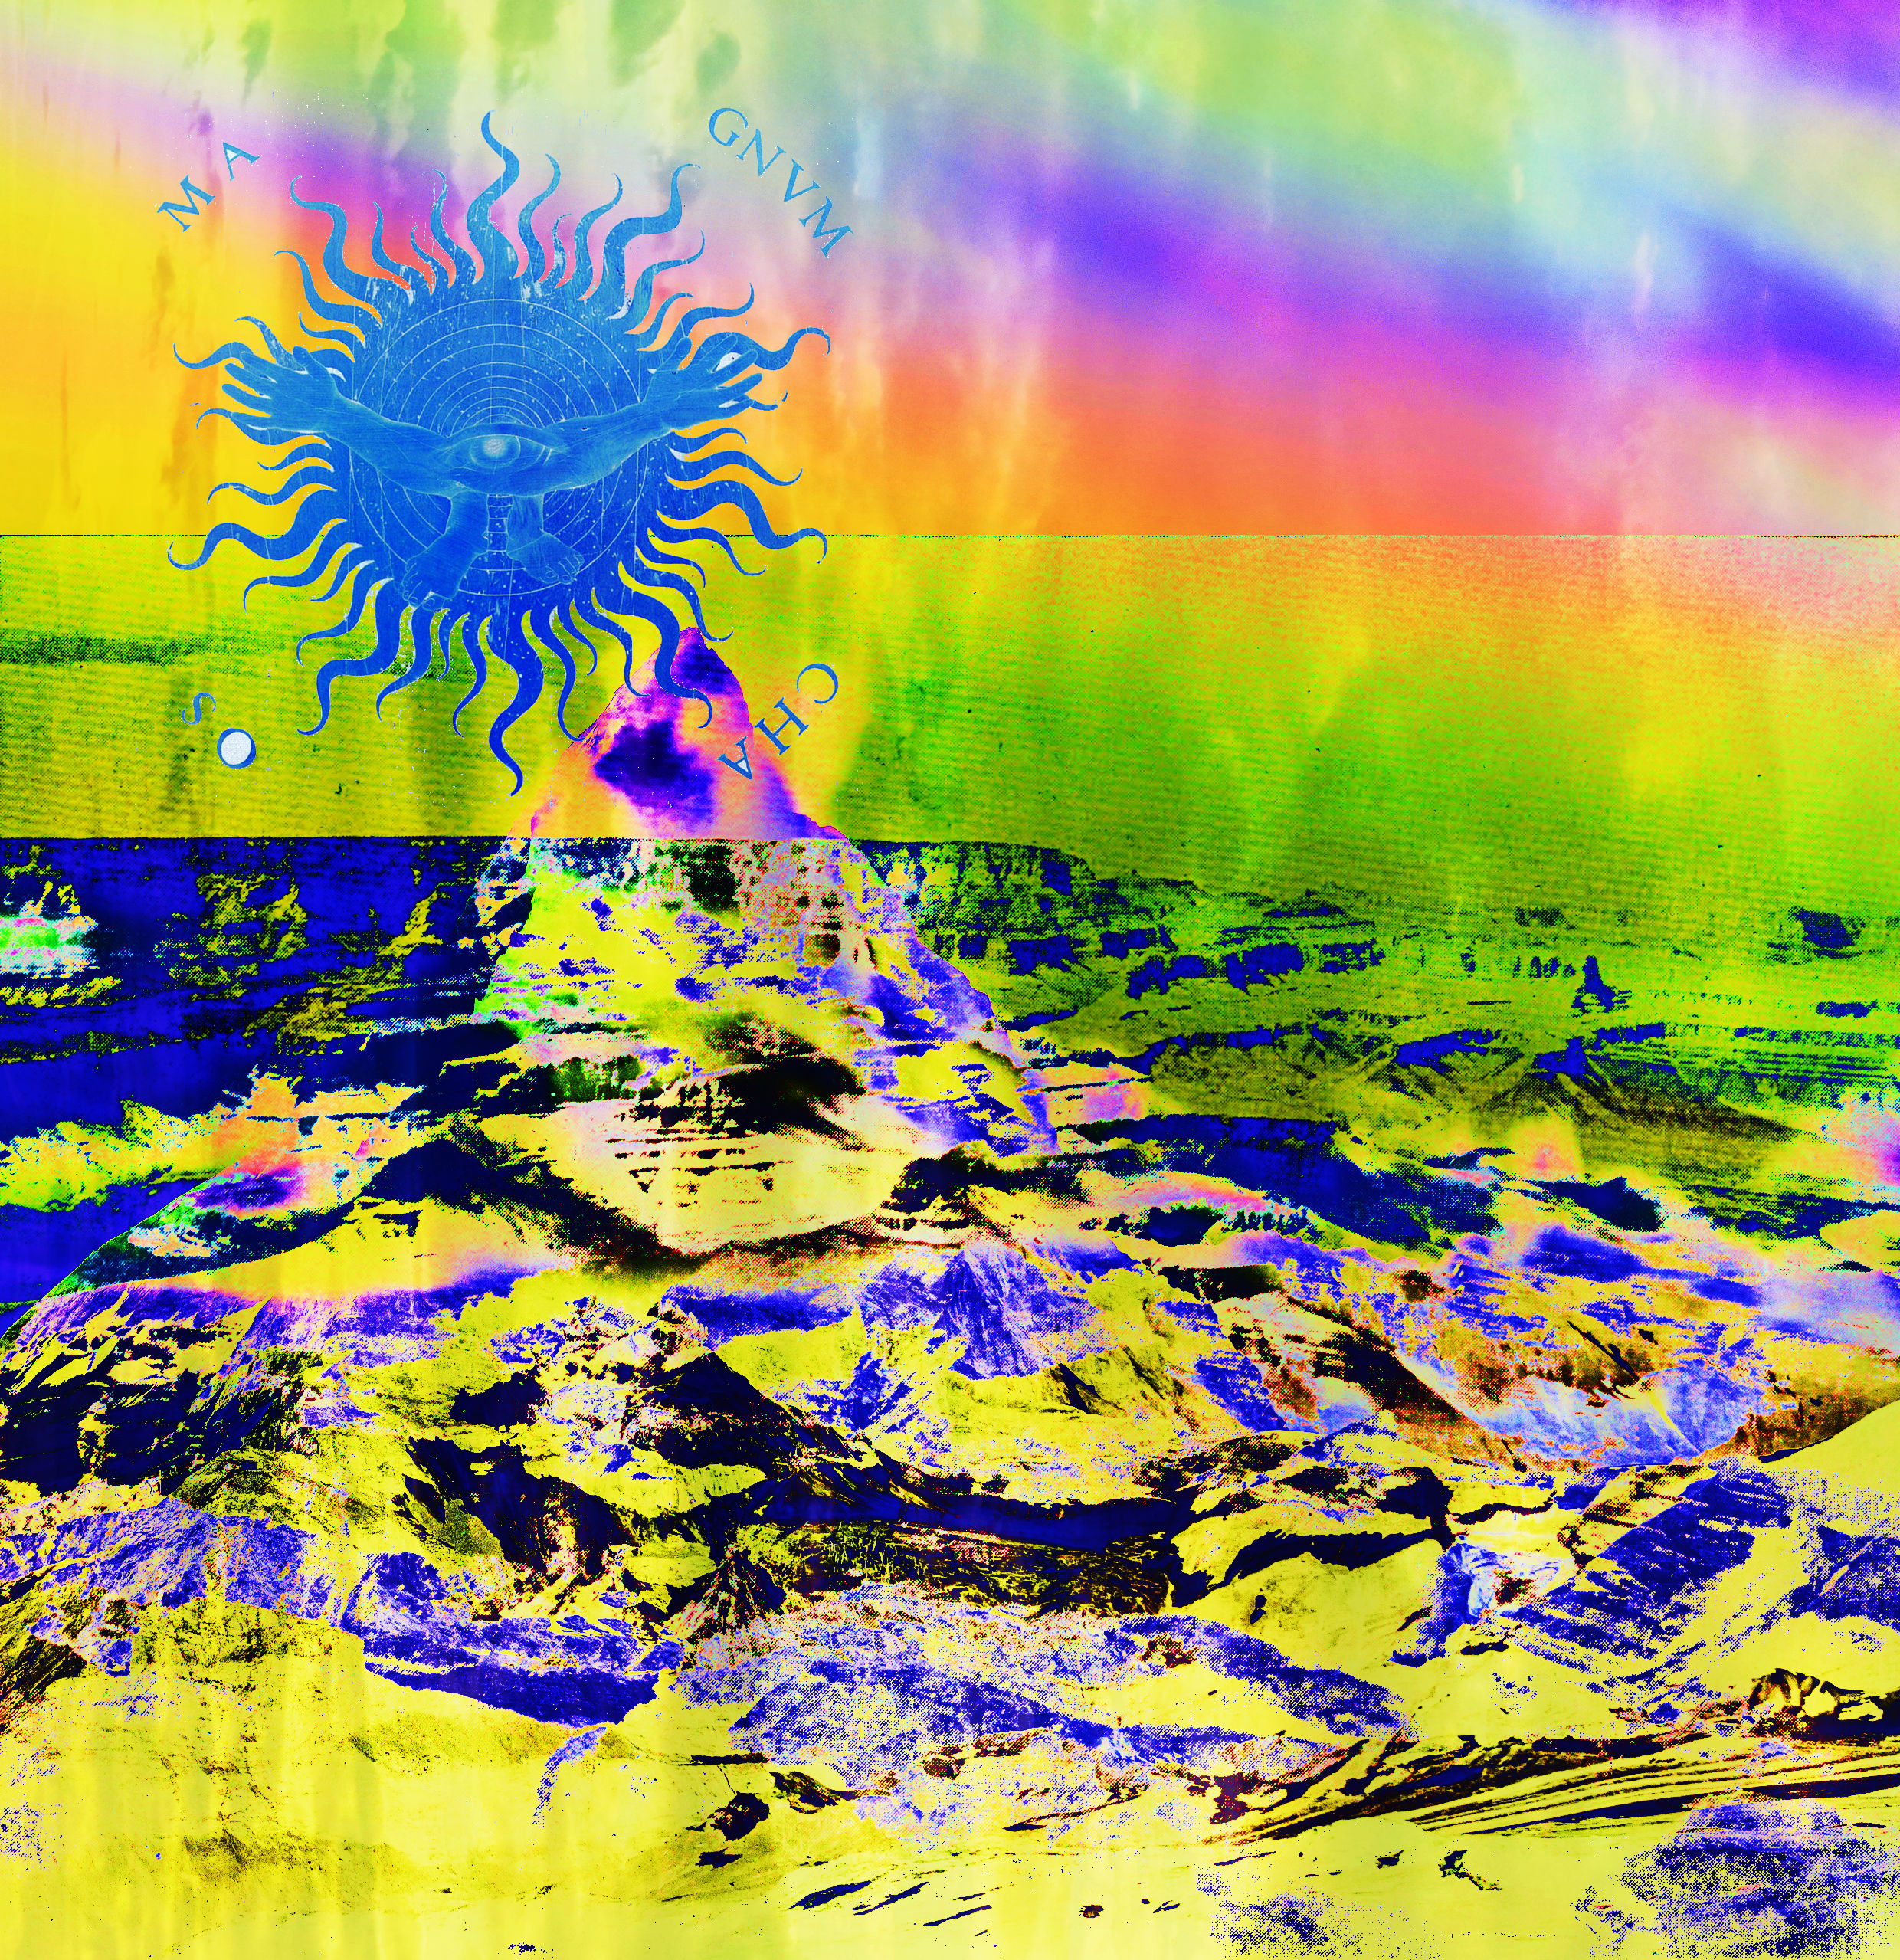 a psychedelic multi-coloured dreamscape with some rock fomrations visible at the bottom, and a sun-like thing with an eye in the centre and hands reaching out, surrounded by the letters 'chao os ma gnvm', done negative colour white and black towards the top